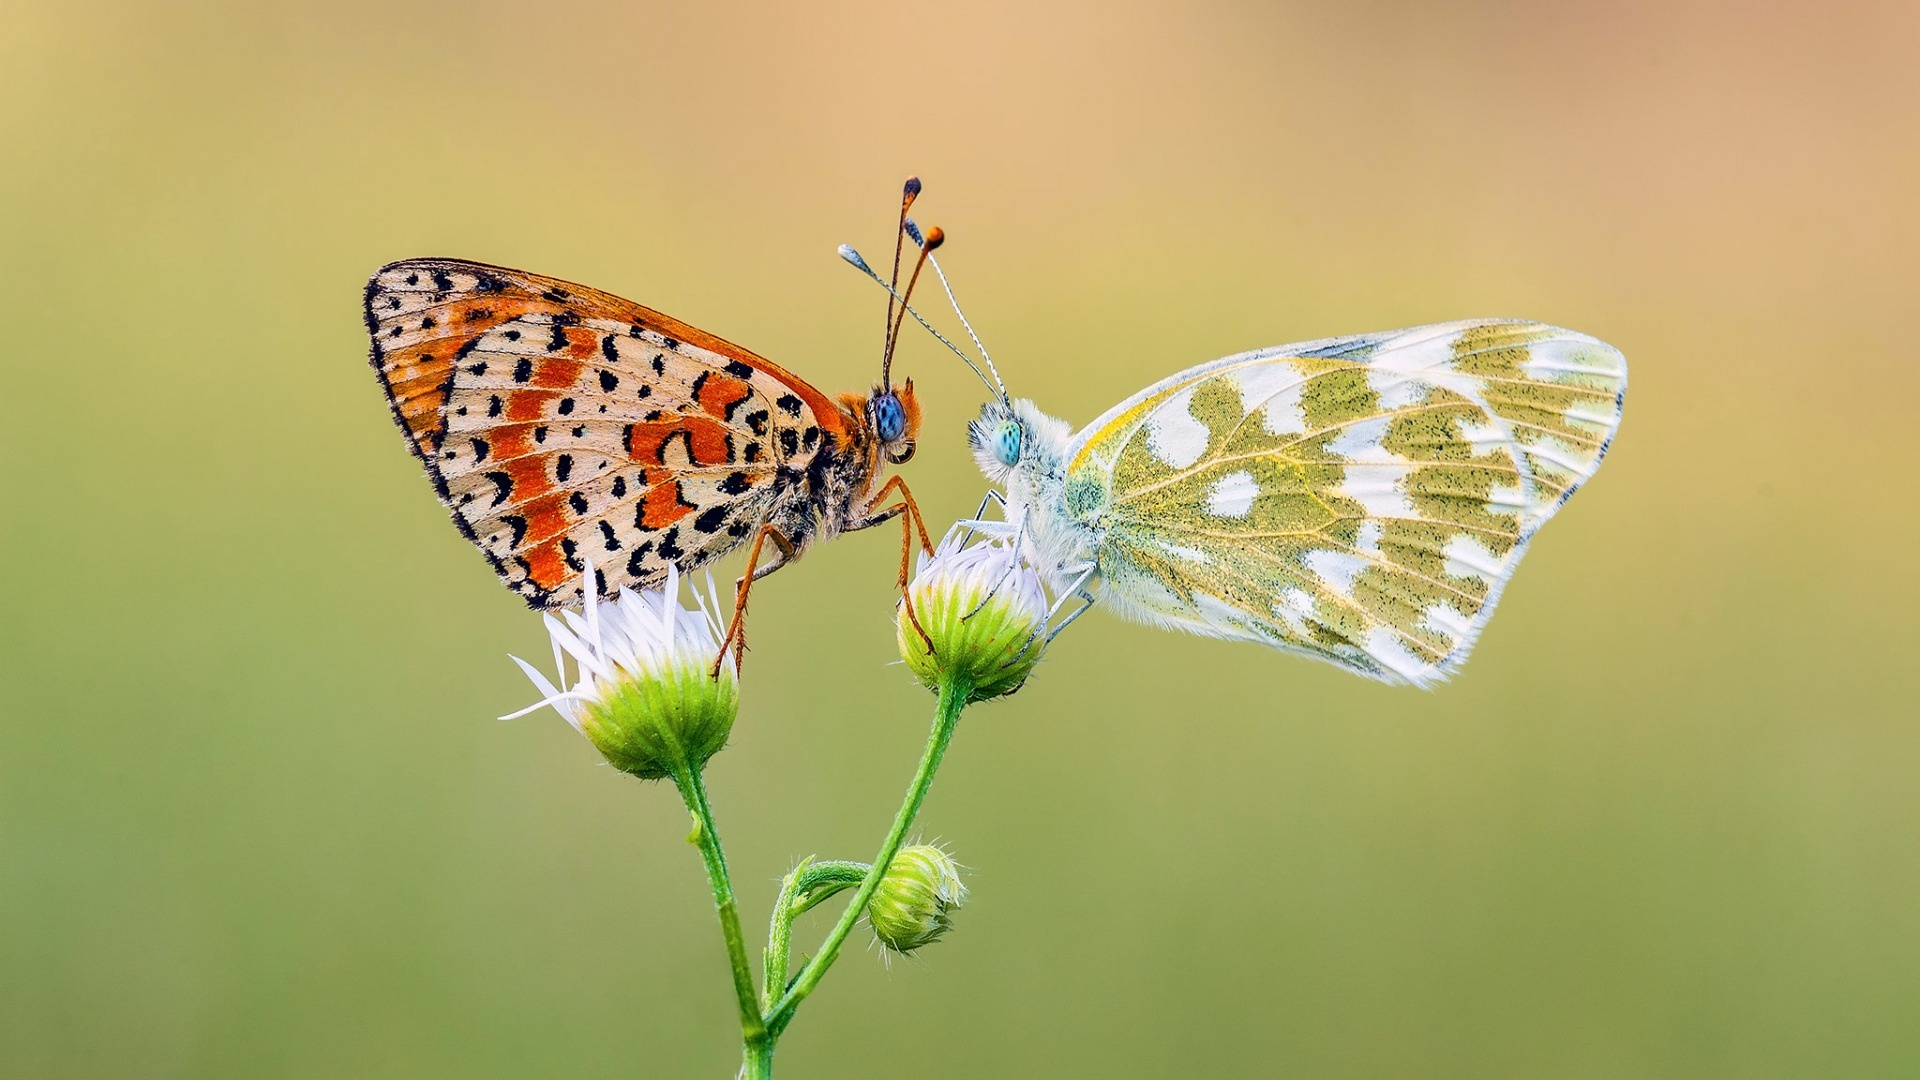 Two Butterfly Romance